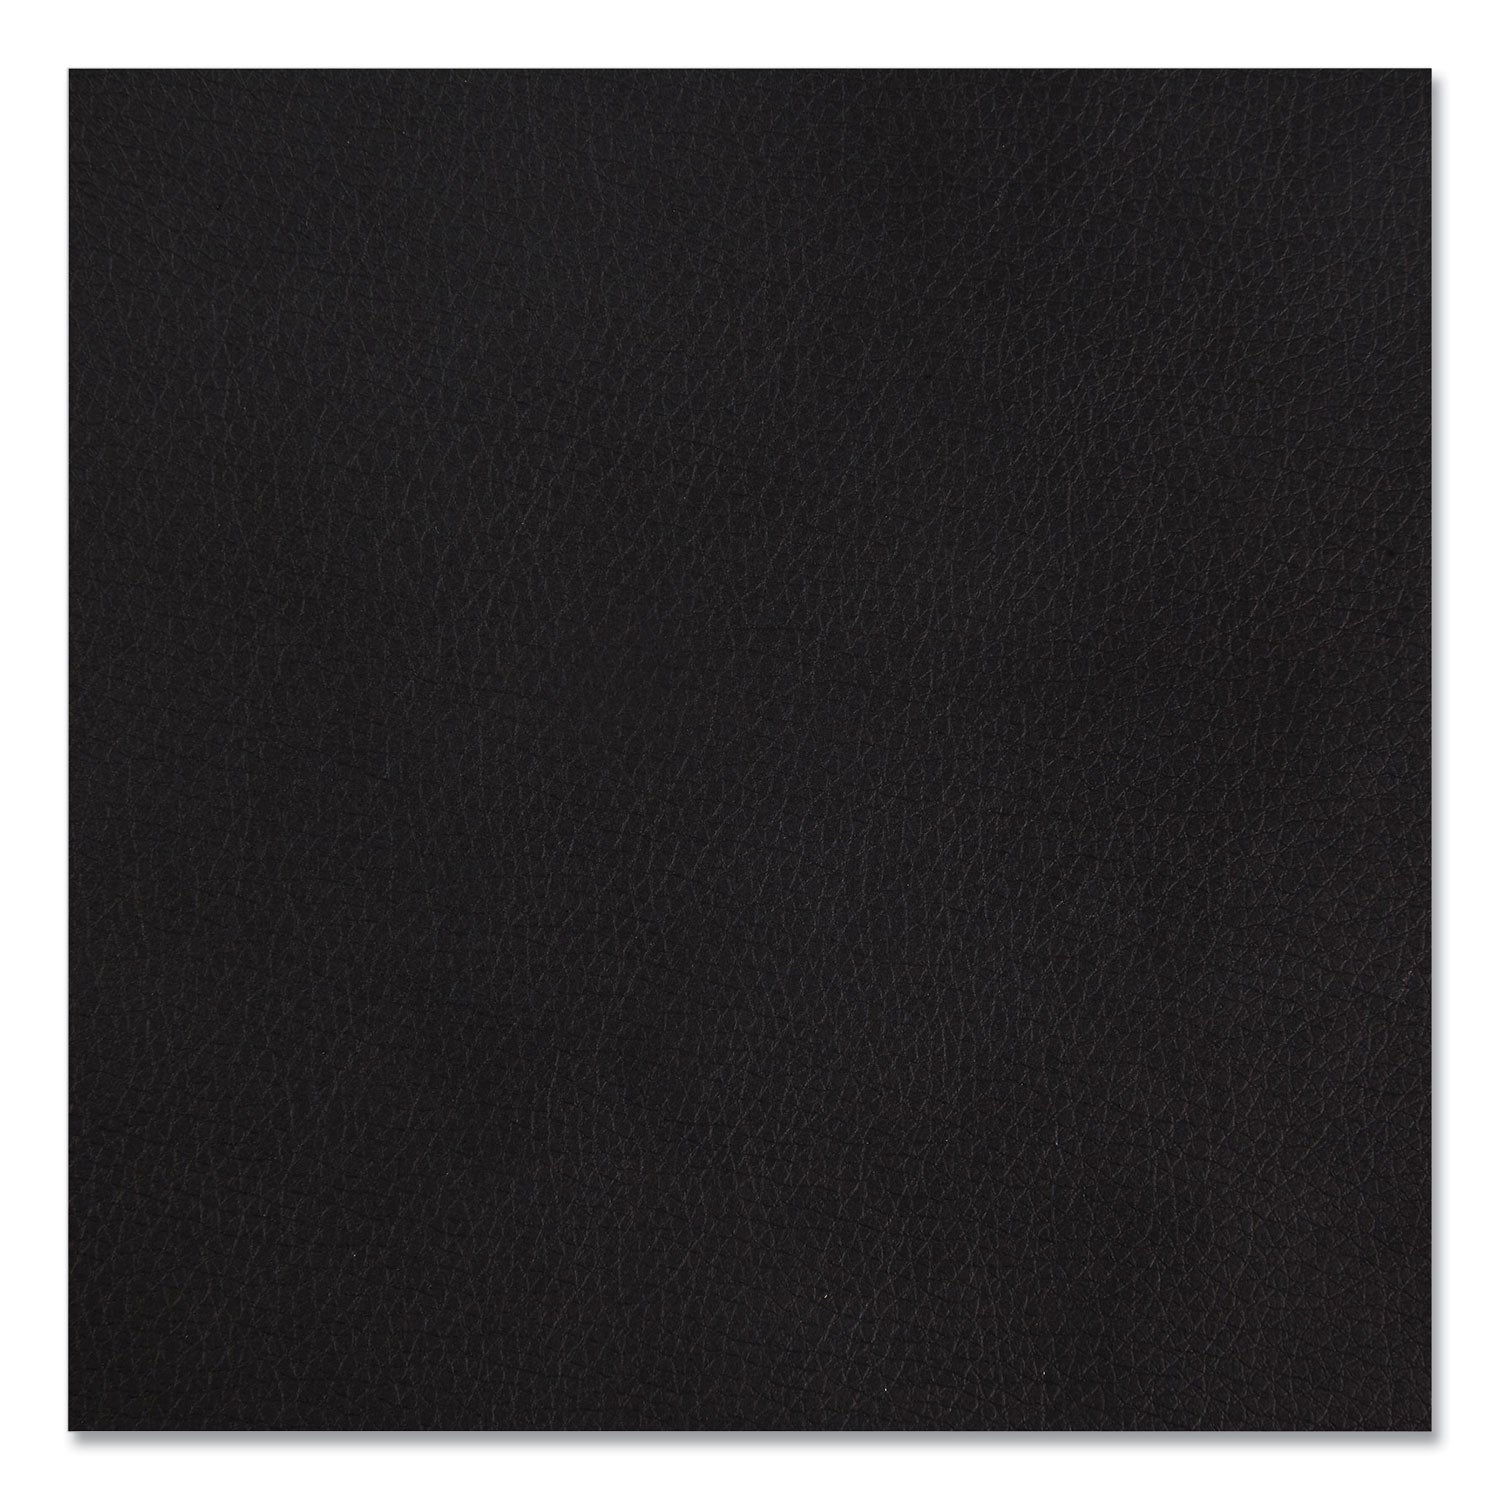 prestige-bonded-leather-manager-chair-supports-up-to-275-lb-black-seat-back-black-base_uos59408 - 5